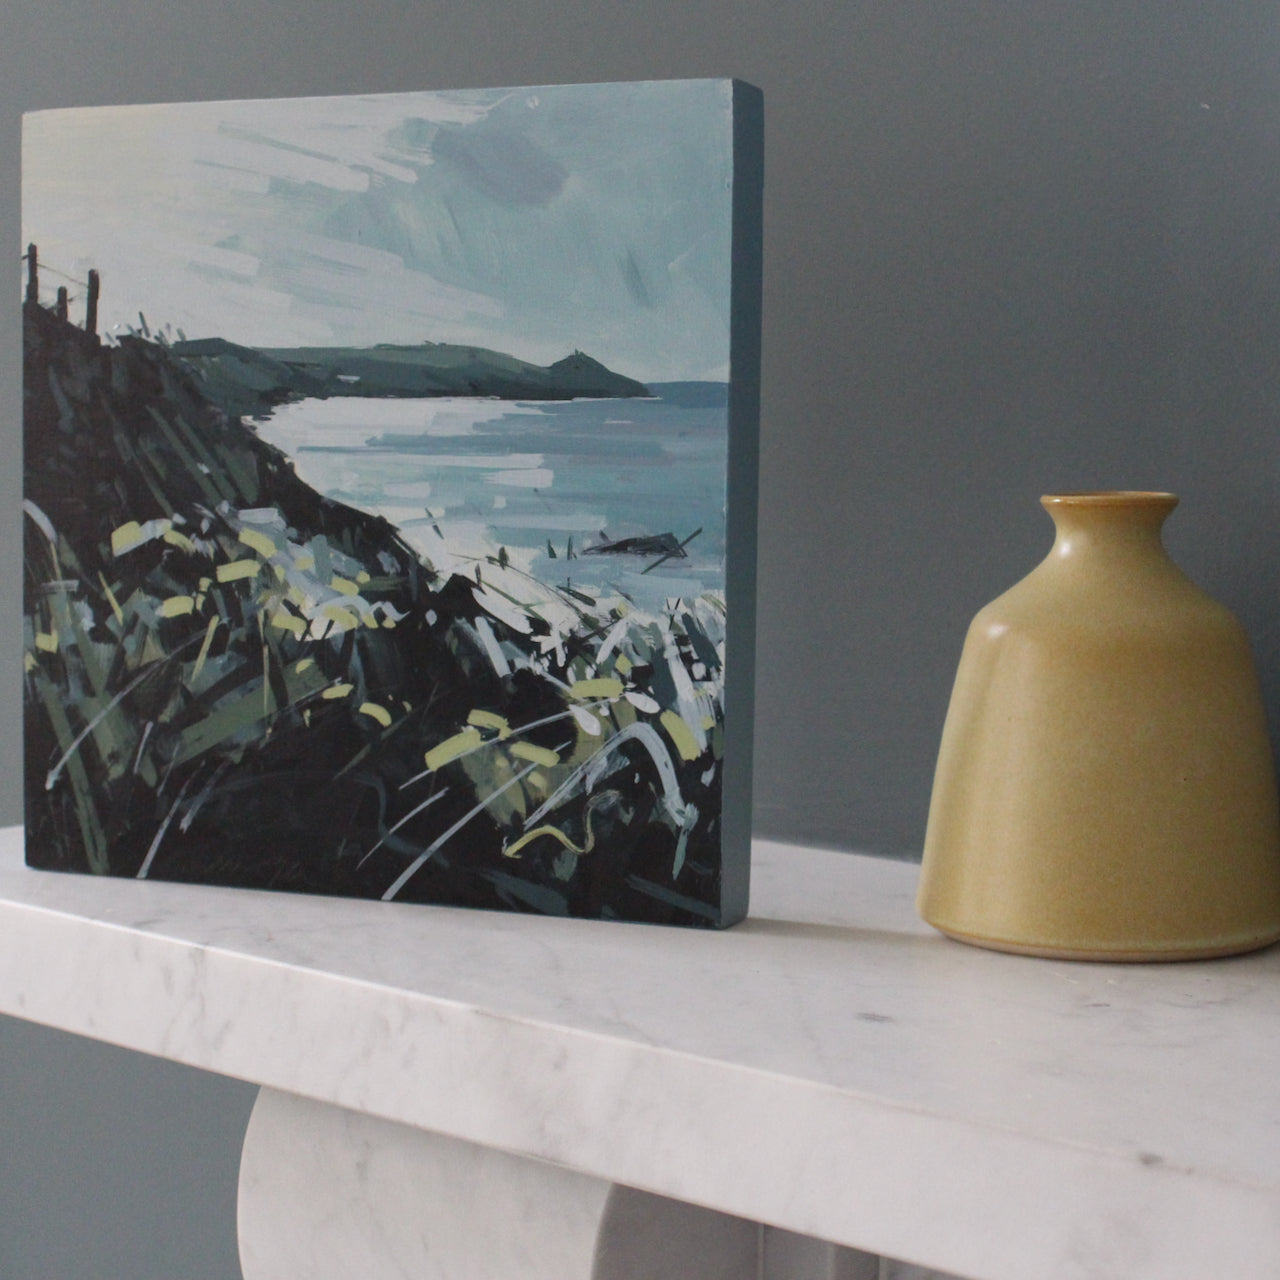 Imogen Bone landscape painting of Rame Head, a peninsula in south east Cornwall, the headland is dark green as are the grasses in the foreground of the painting, the painting is sitting on a marble fireplace next to a small yellow bottle